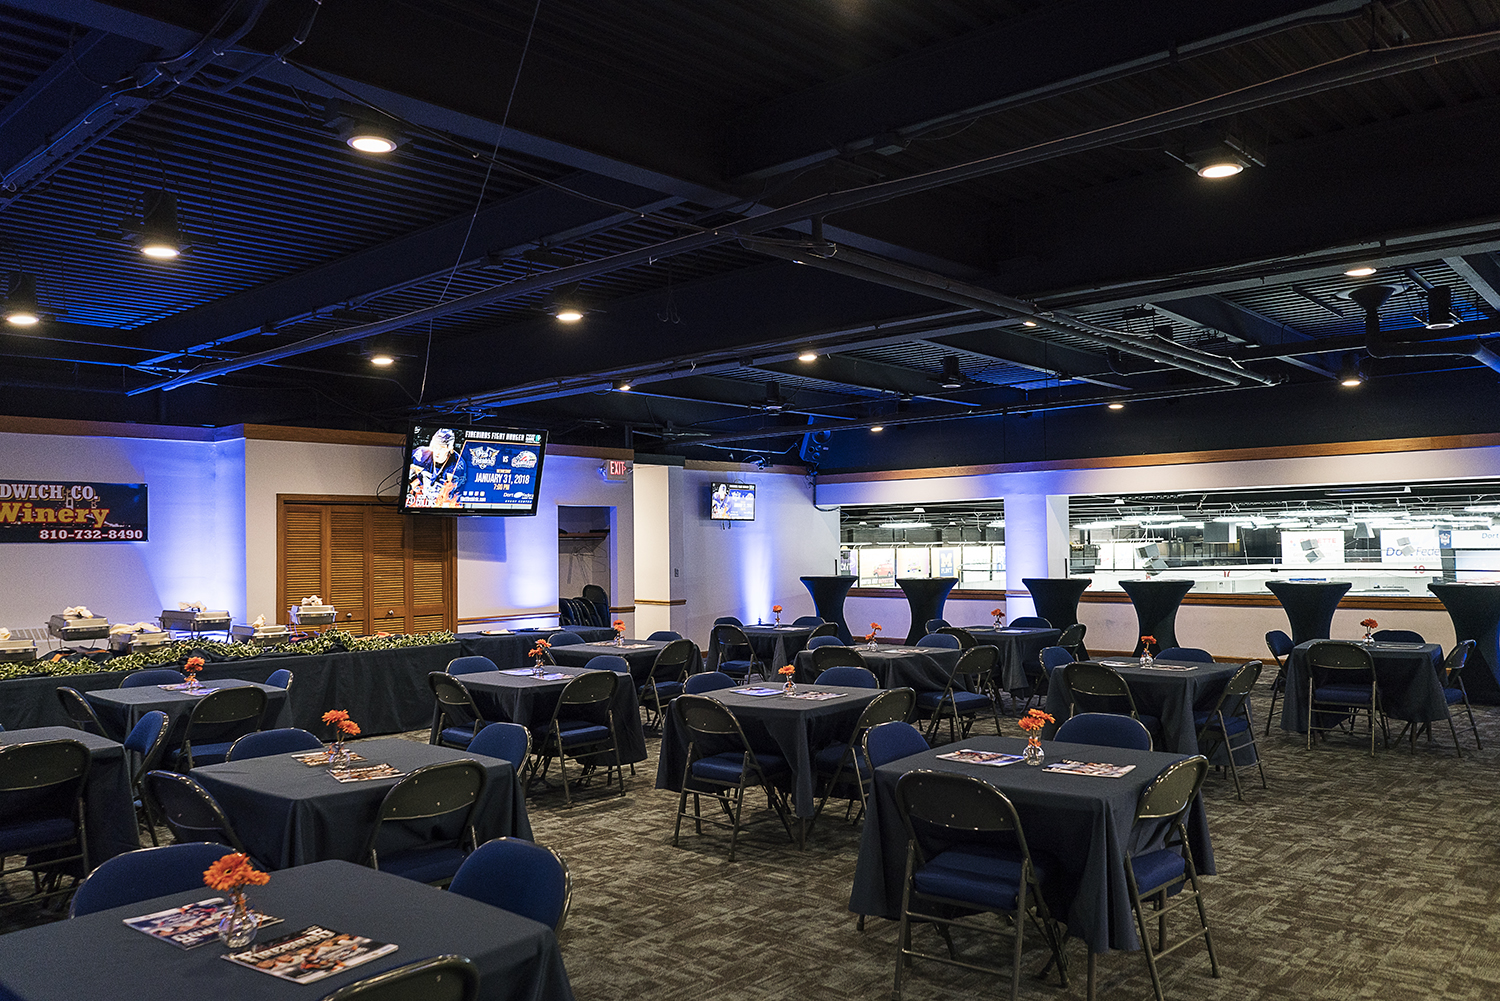 Flint, MI - Tuesday, January 30, 2018: The updated VIP area, the Blue Line Club, at the Dort Federal Event Center.